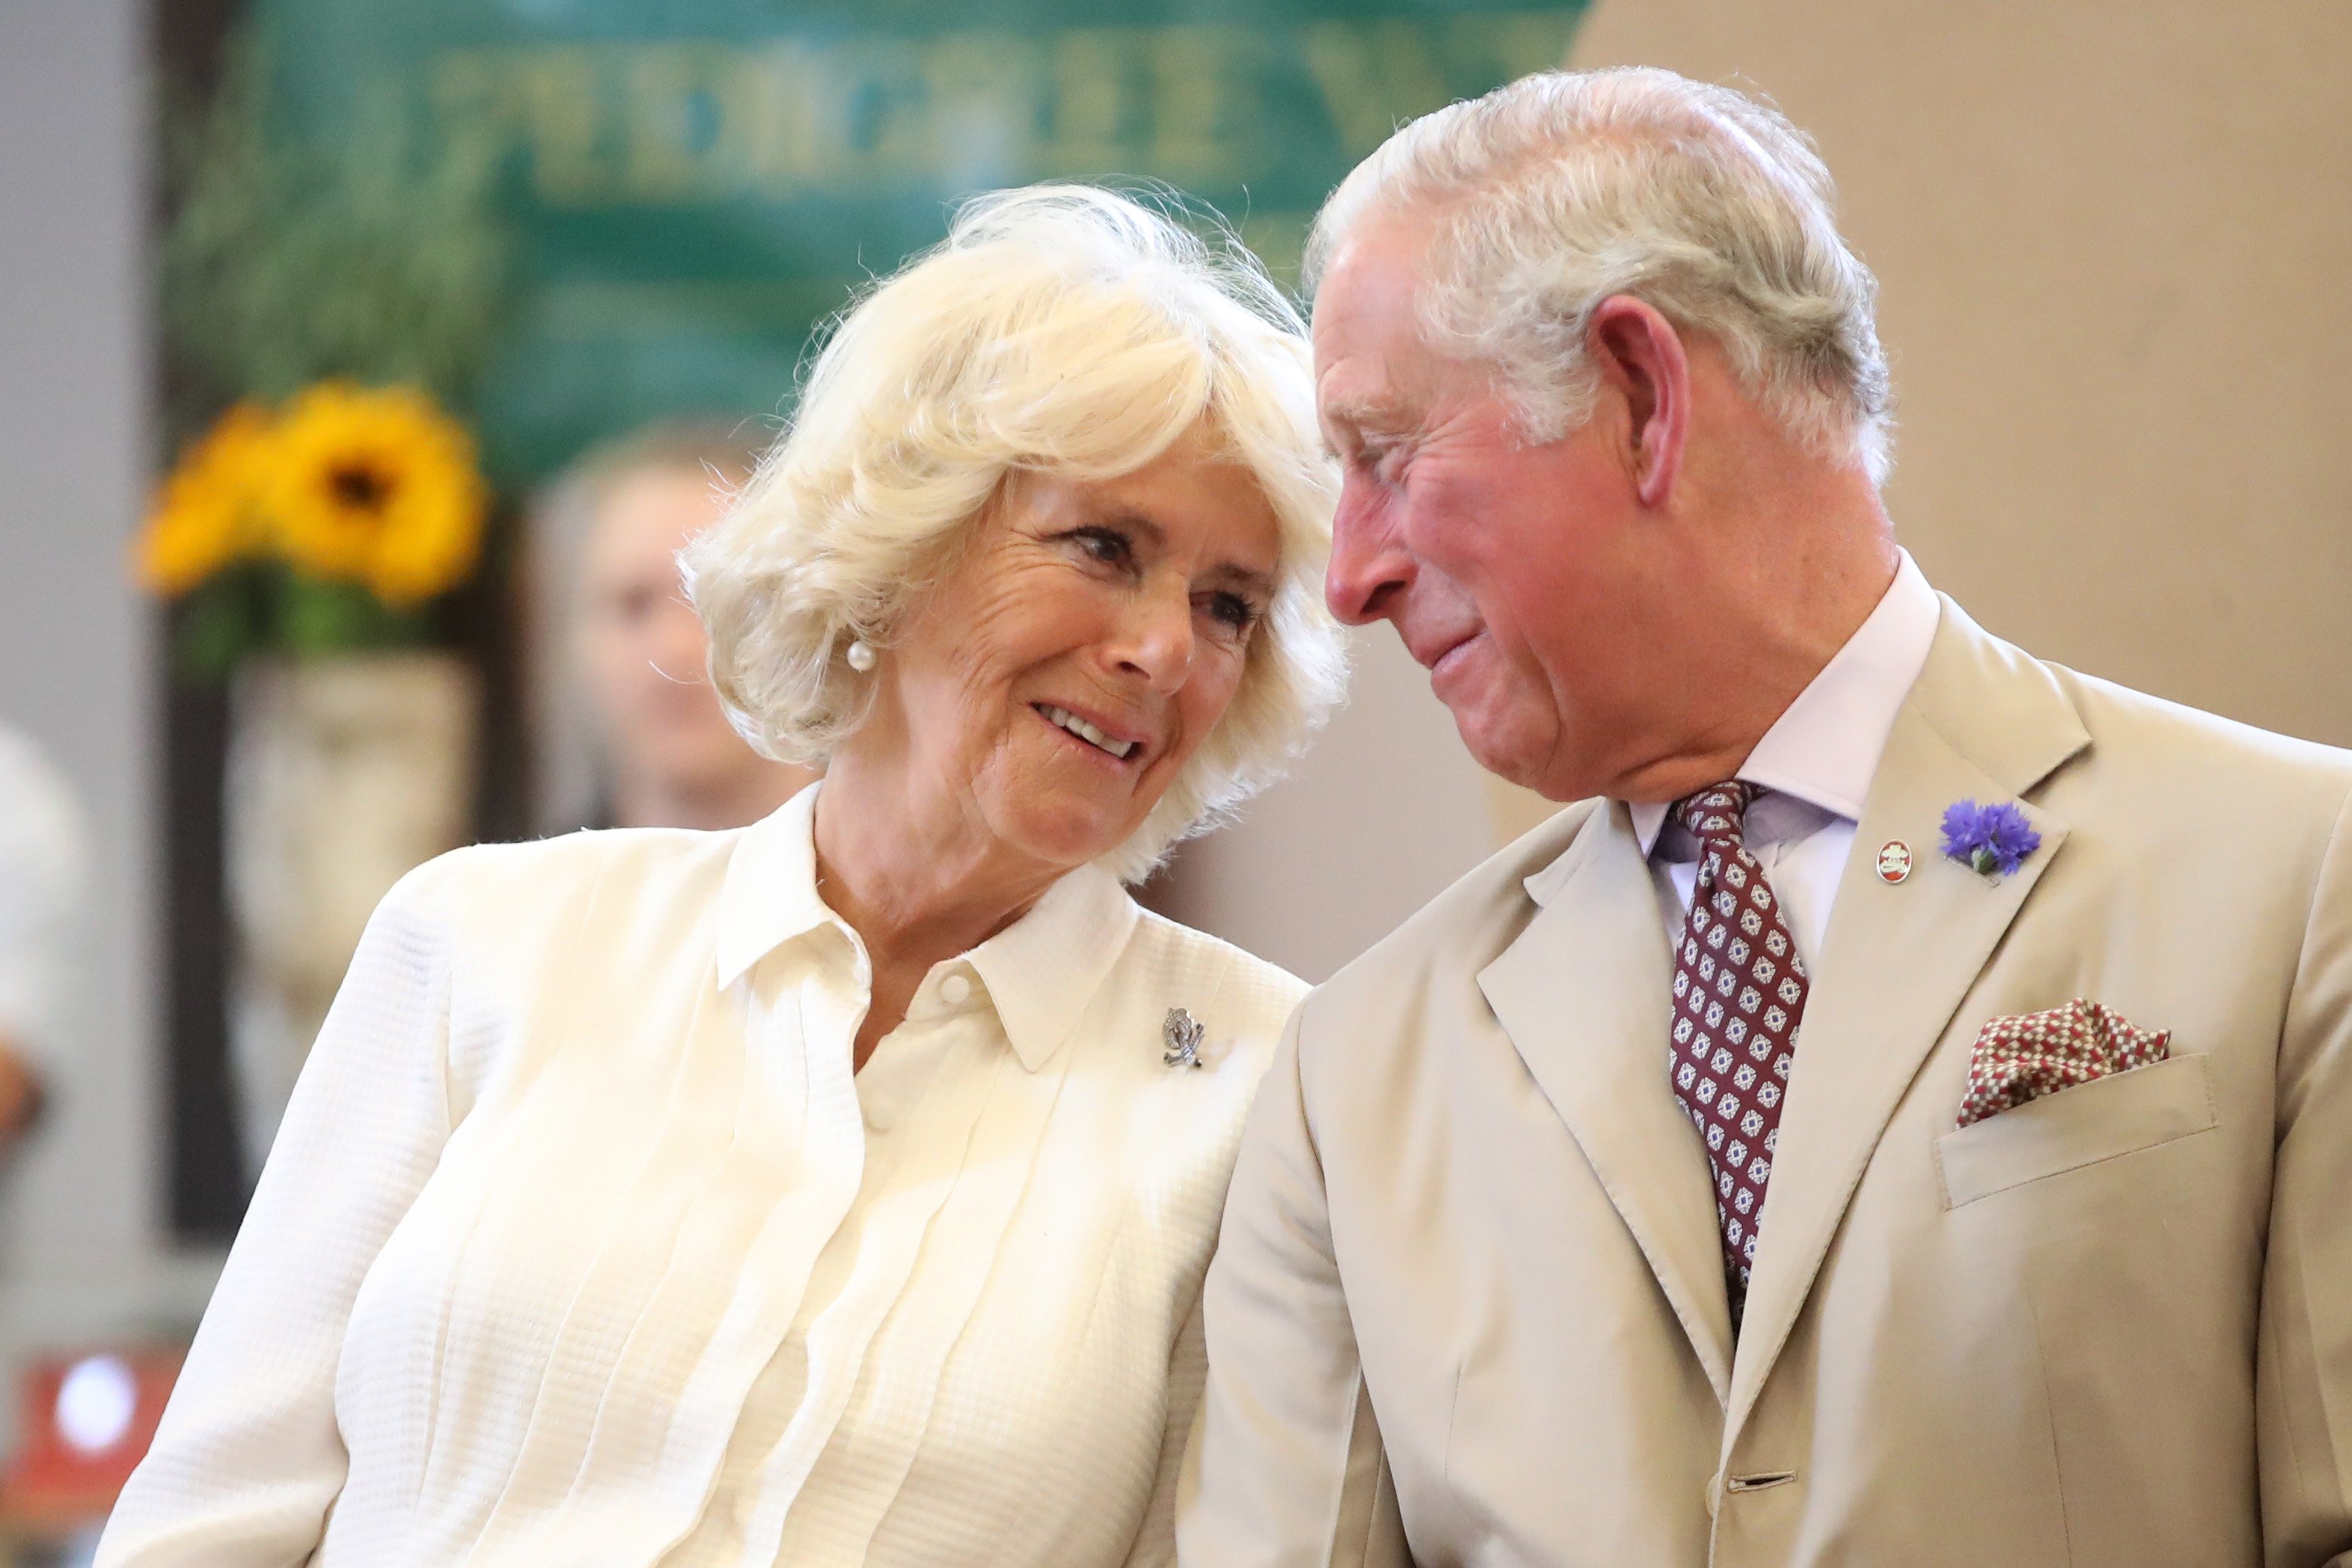 King Charles and Queen Consort Camilla, Duchess of Cornwall at the reopening the newly-renovated Edwardian community hall on July 4, 2018 in Builth Wells, Wales. | Source: Getty Images